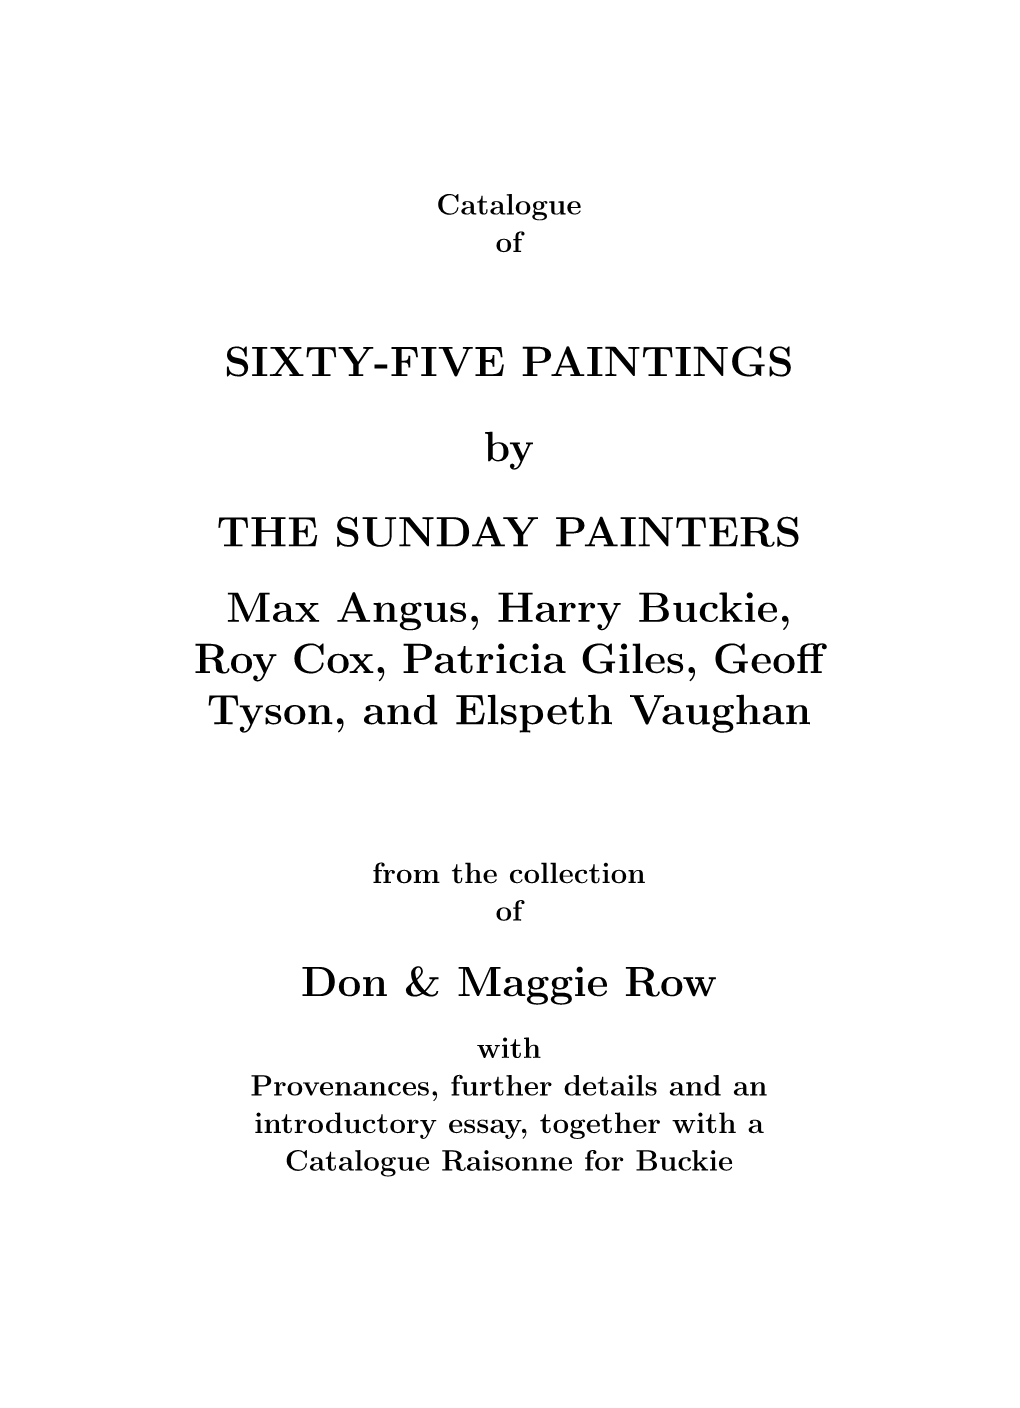 SIXTY-FIVE PAINTINGS by 'THE SUNDAY PAINTERS' Max Angus